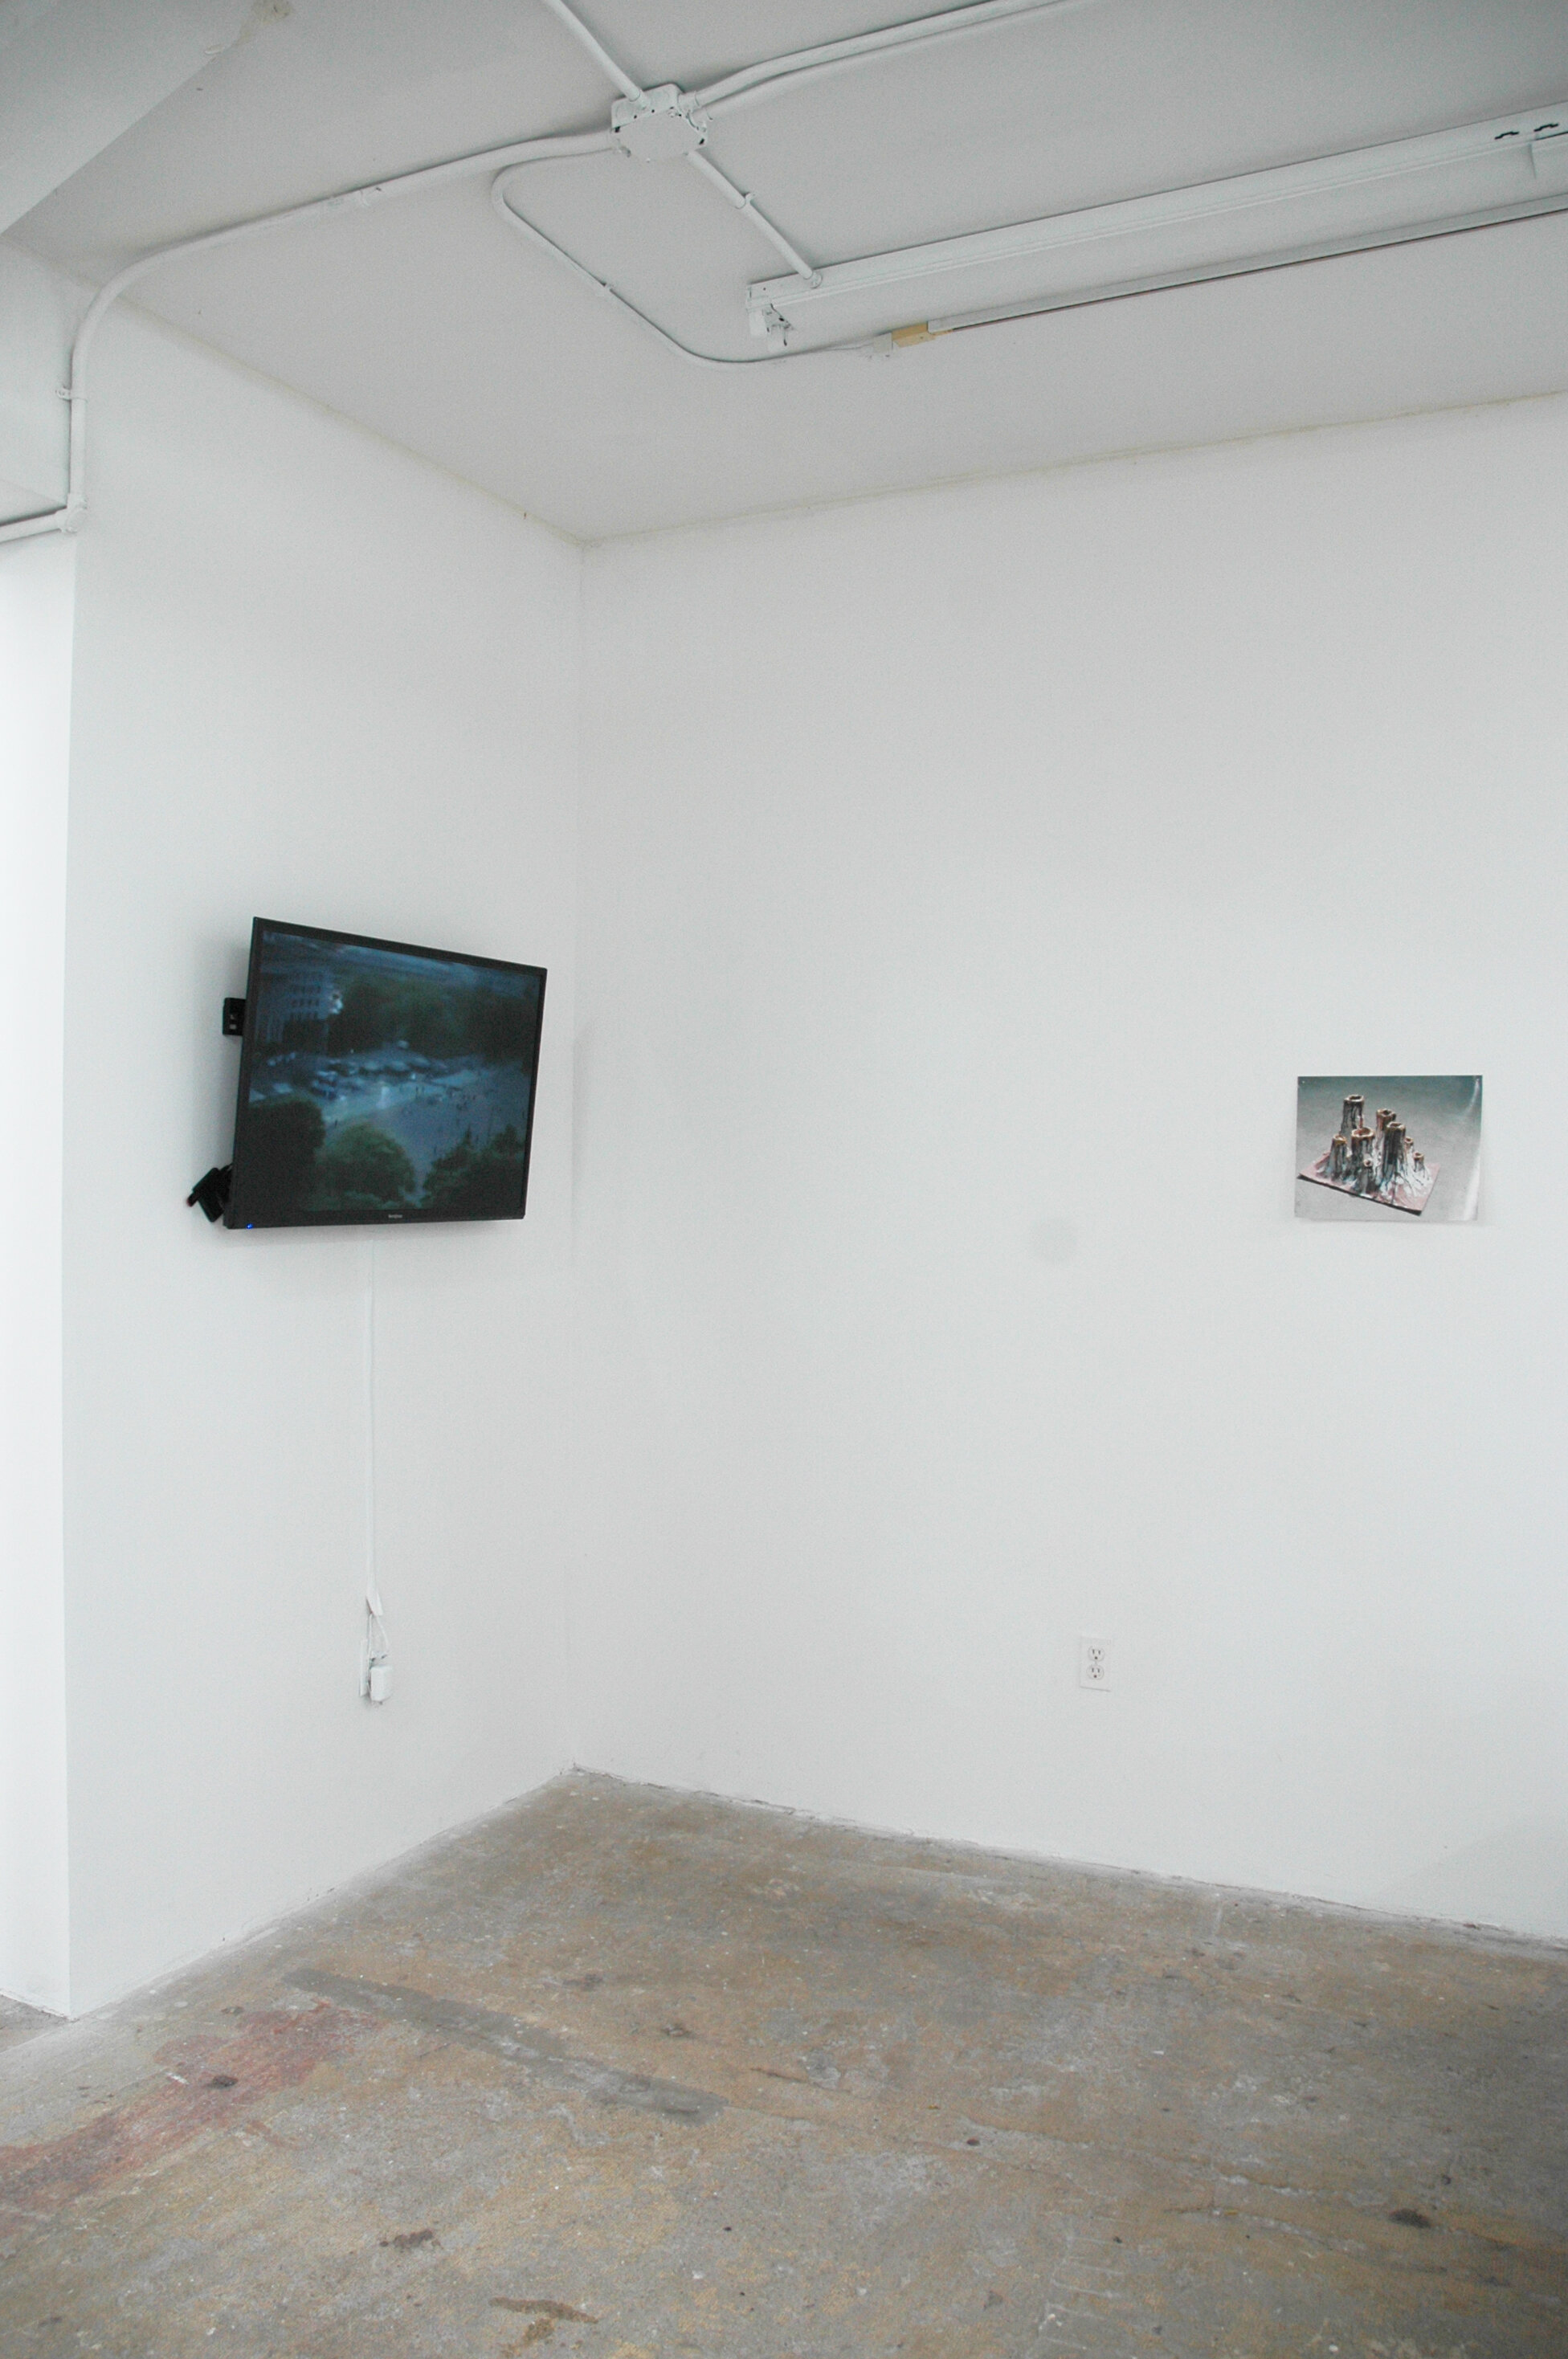 Installation image from the 2016 exhibition, Open Space, Opening Spaces, featuring works by Shahrzad Changalvaee, Michael Cloud, Carlos Sandoval de Leon, at Cindy Rucker Gallery